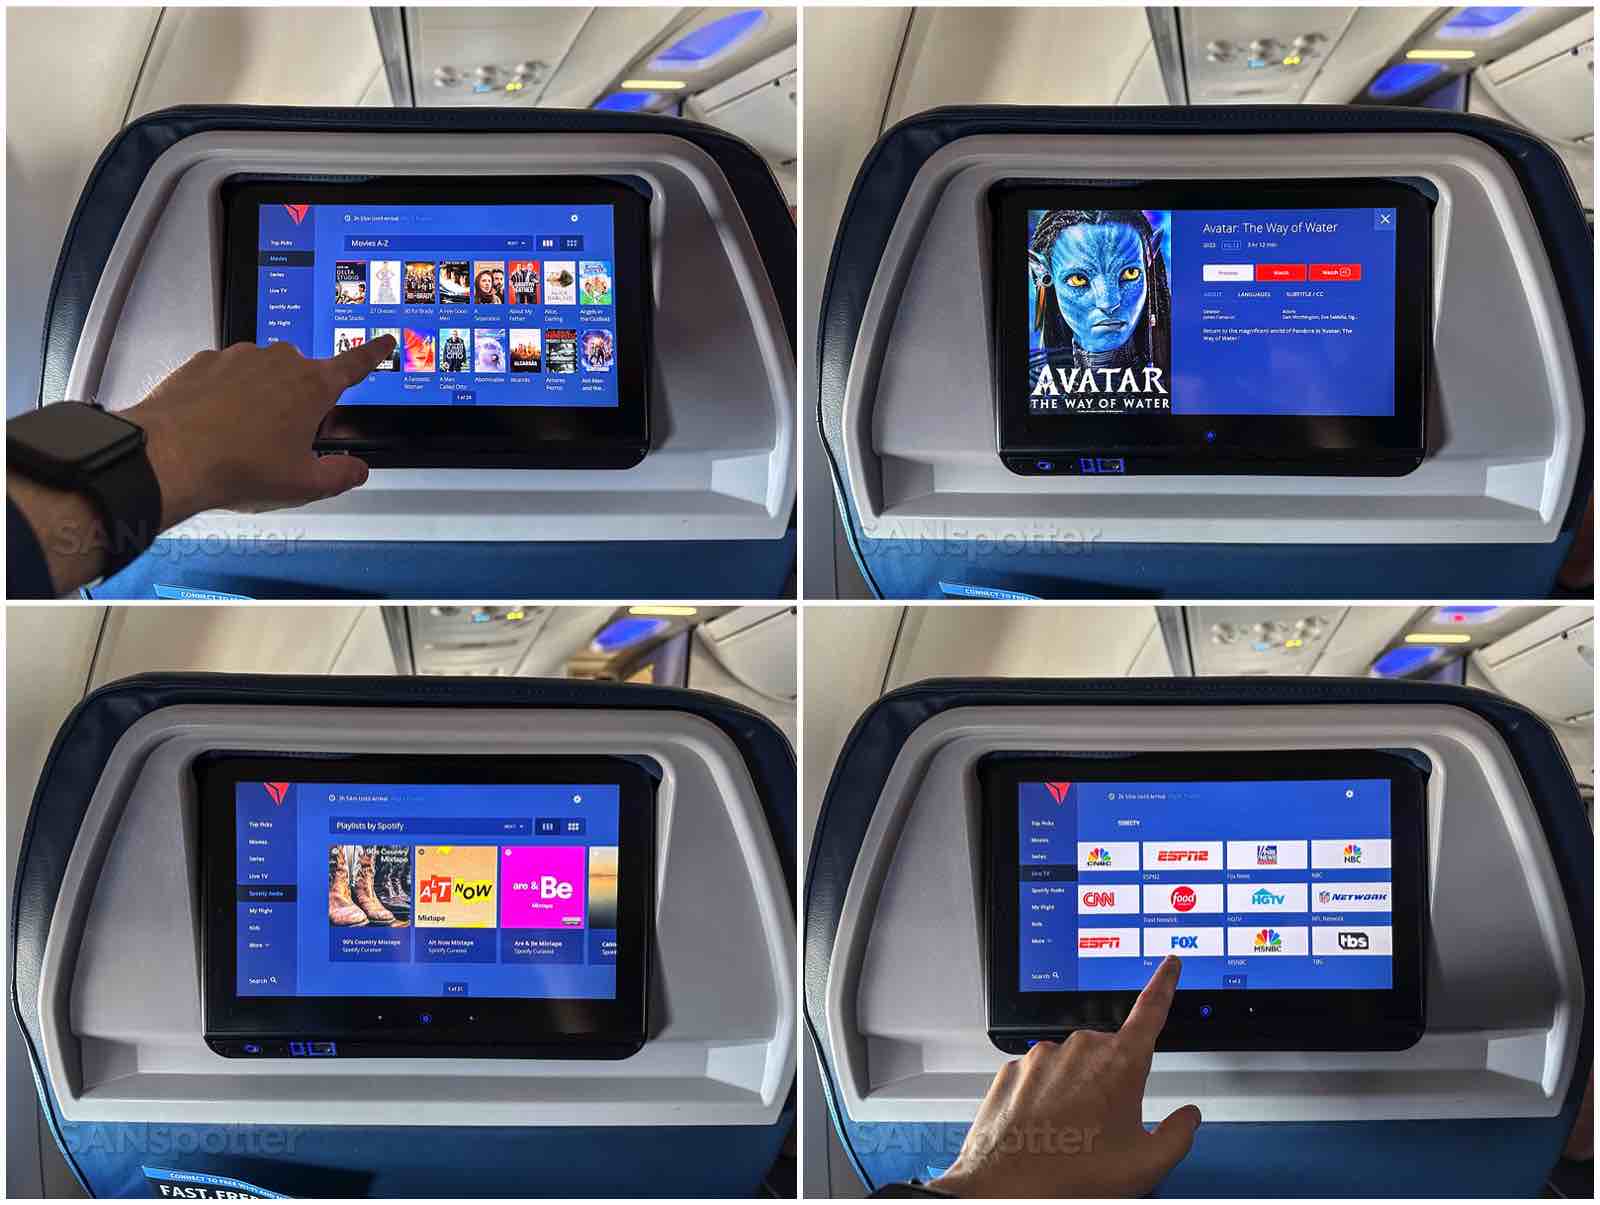 Live TV, podcasts, games, and movies in Delta 737-900 first class 